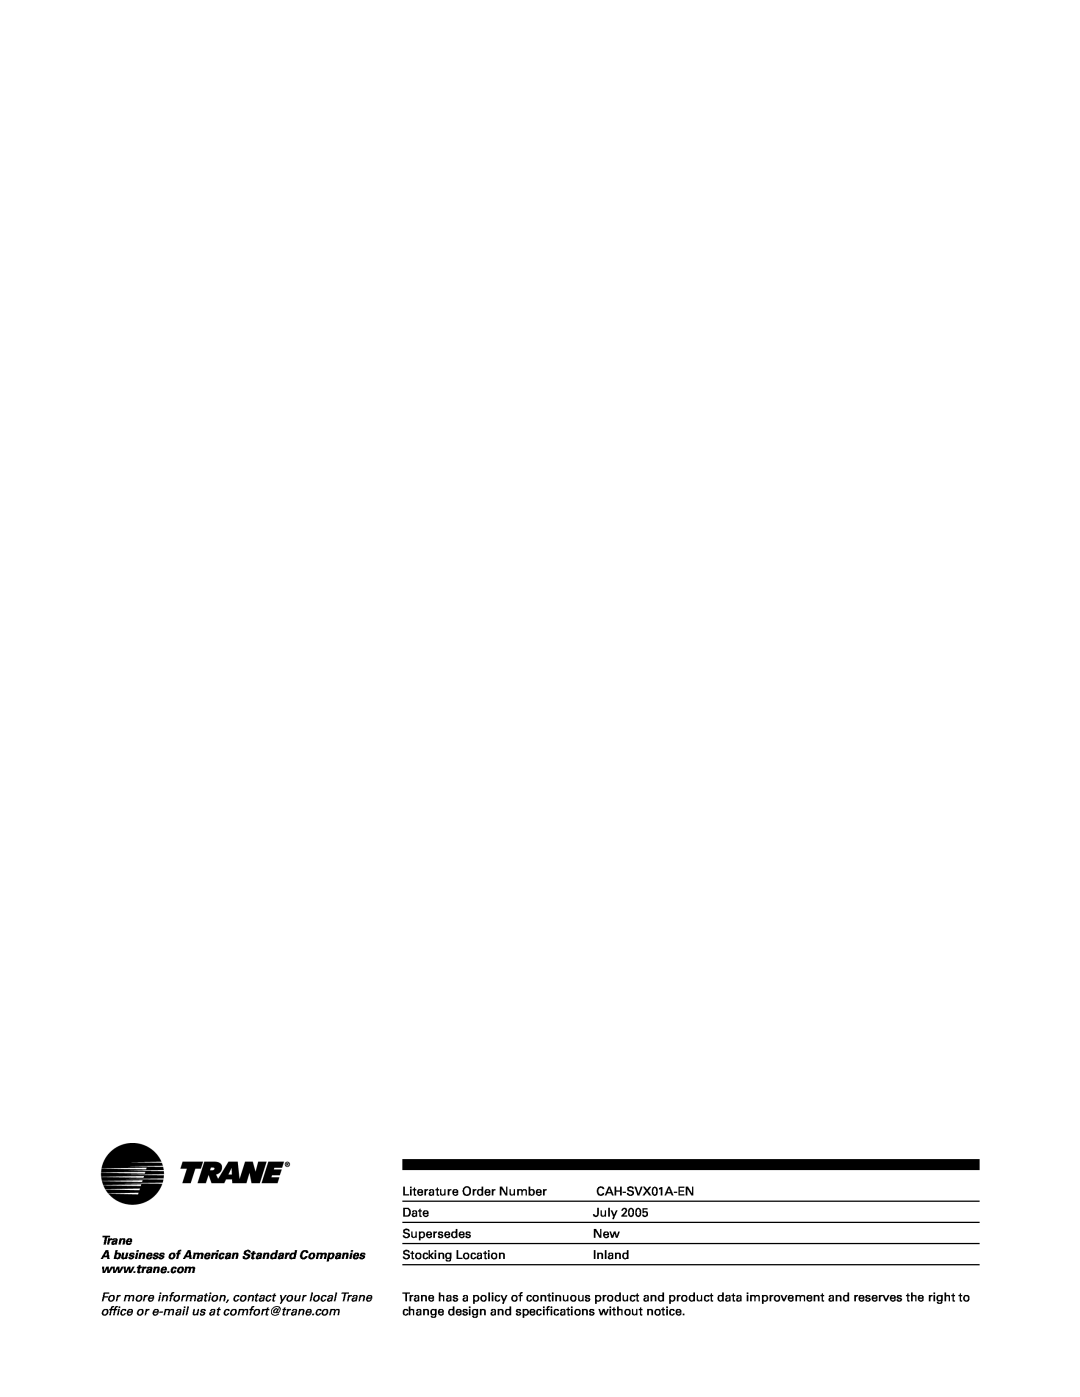 Trane CAH-SVX01A-EN manual Literature Order Number, Date, July, Trane, SupersedesNew, Stocking Location, Inland 